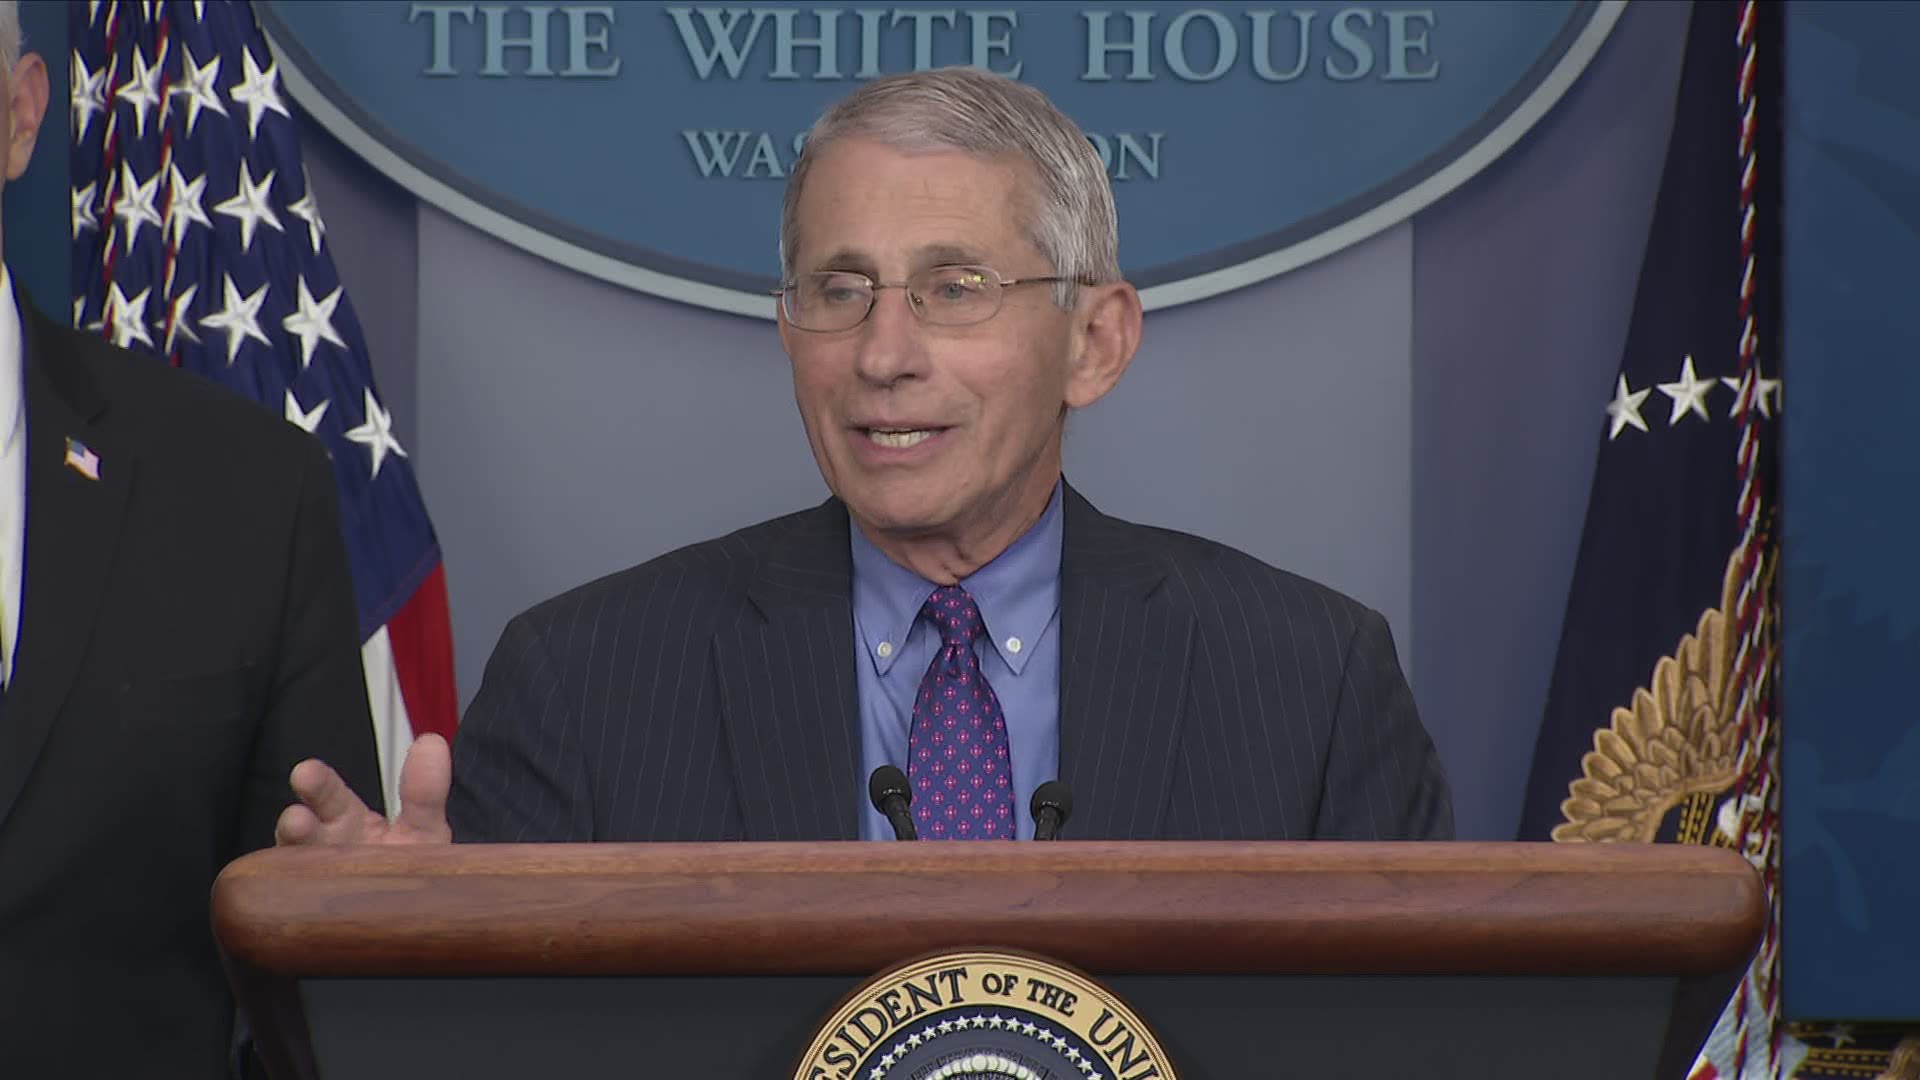 Dr. Anthony Fauci of the White House task force said Thursday that he thinks the U.S. would be able to handle it if the coronavirus comes back.